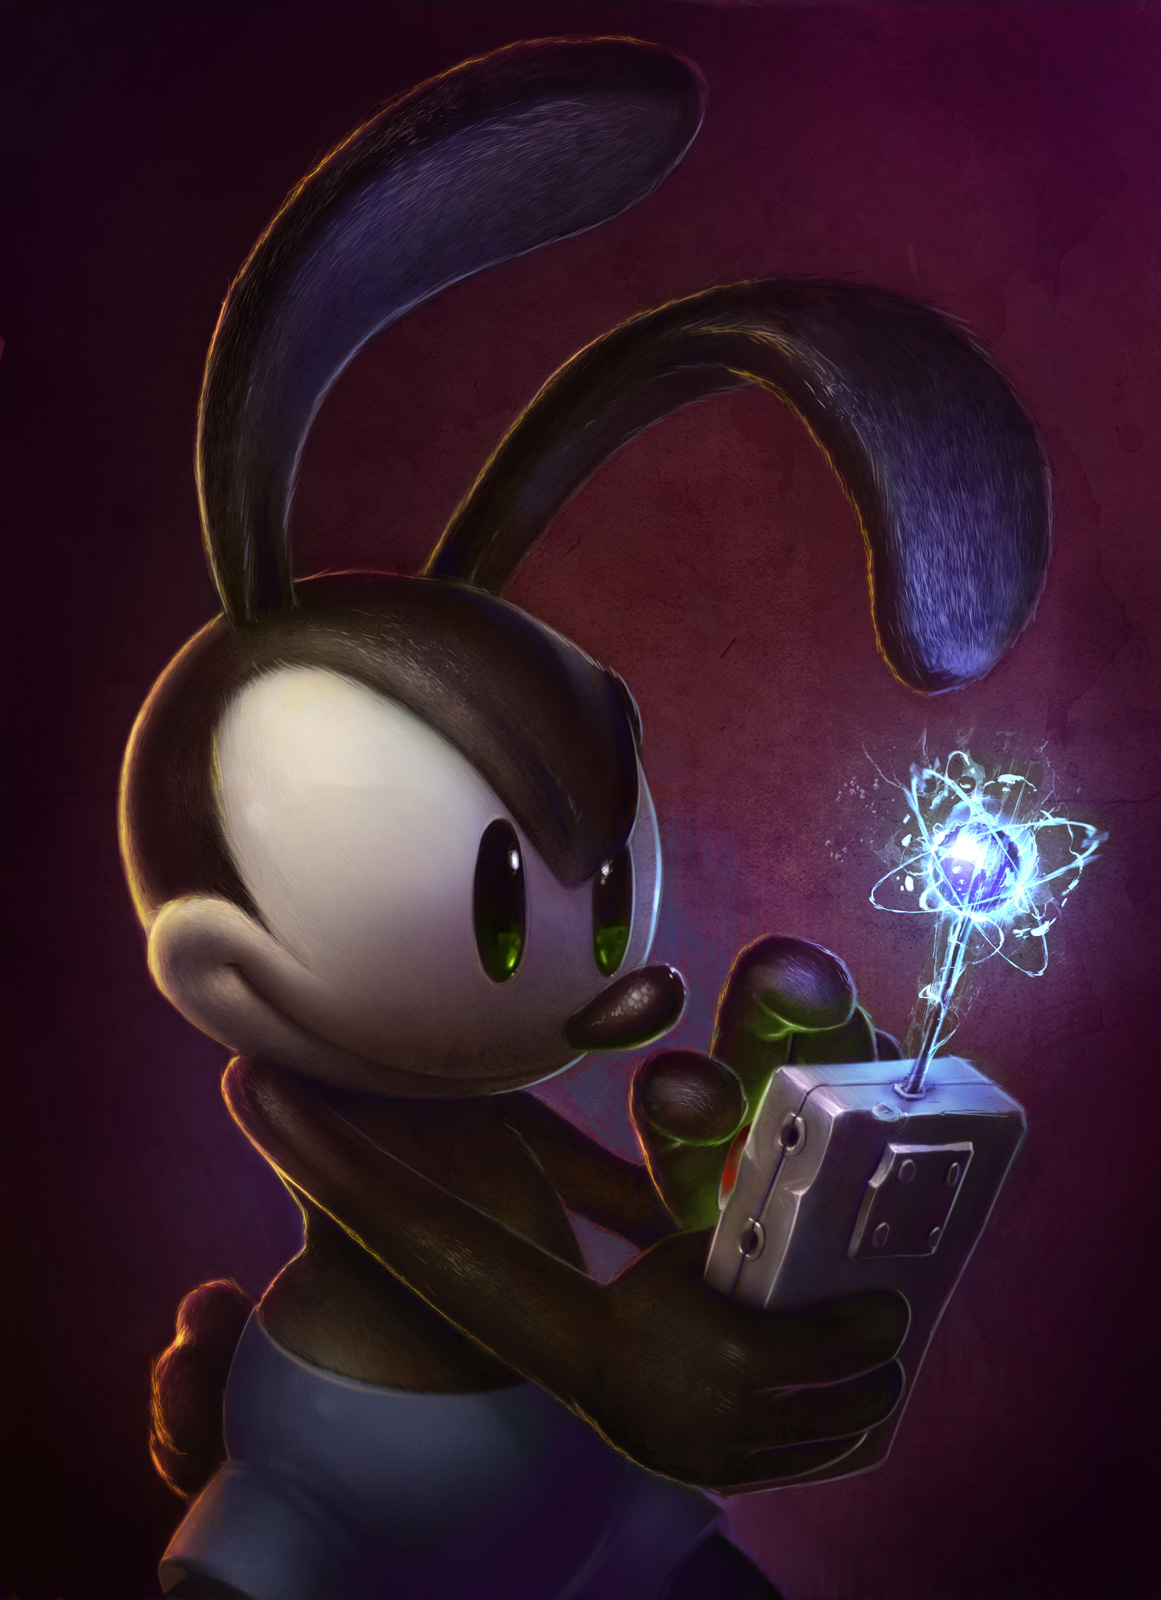 Disney Epic Mickey 2 The Power Of Two Concept Art By Shawn Melchor.